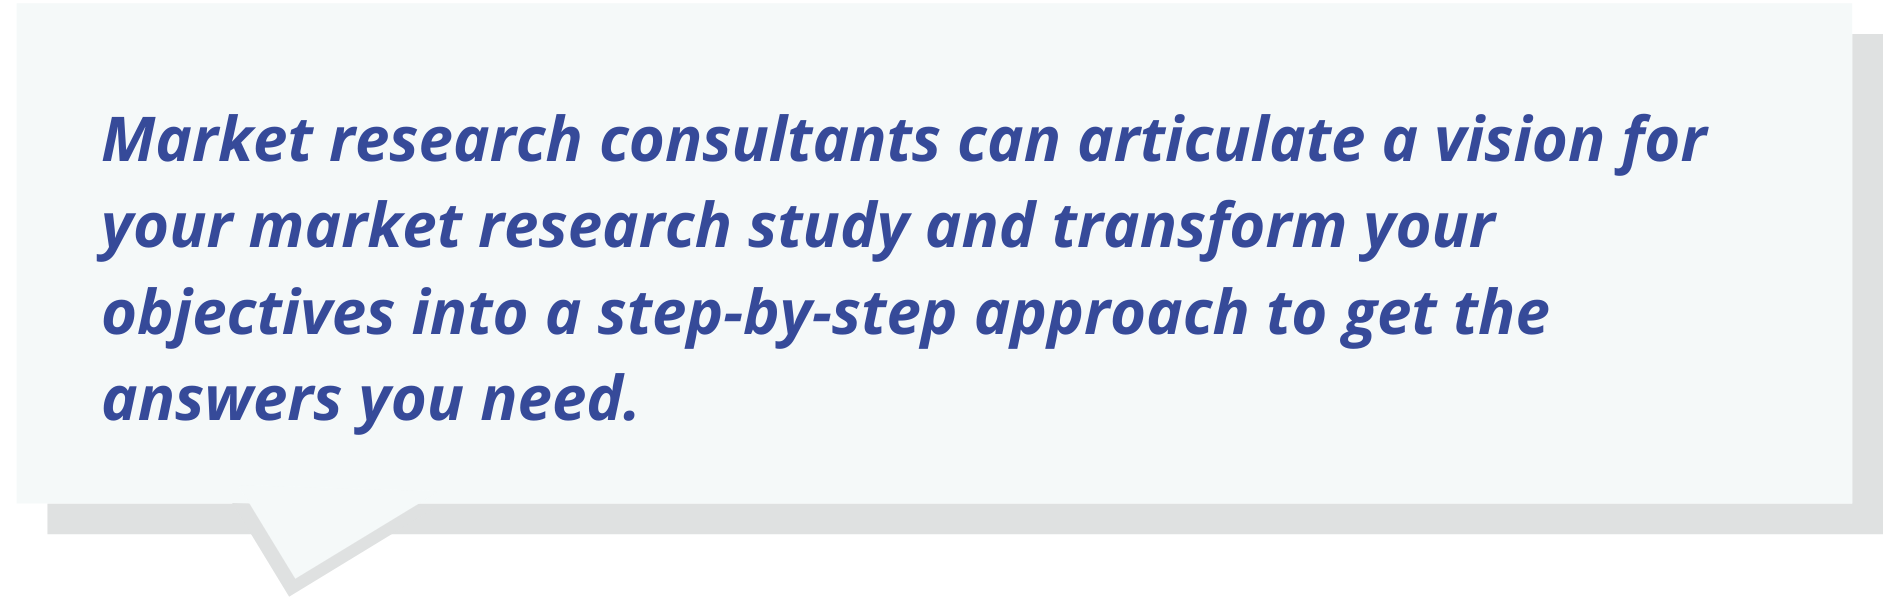 Market research consultants can articulate a vision for your market research study and transform your objectives into a step-by-step approach to get the answers you need.